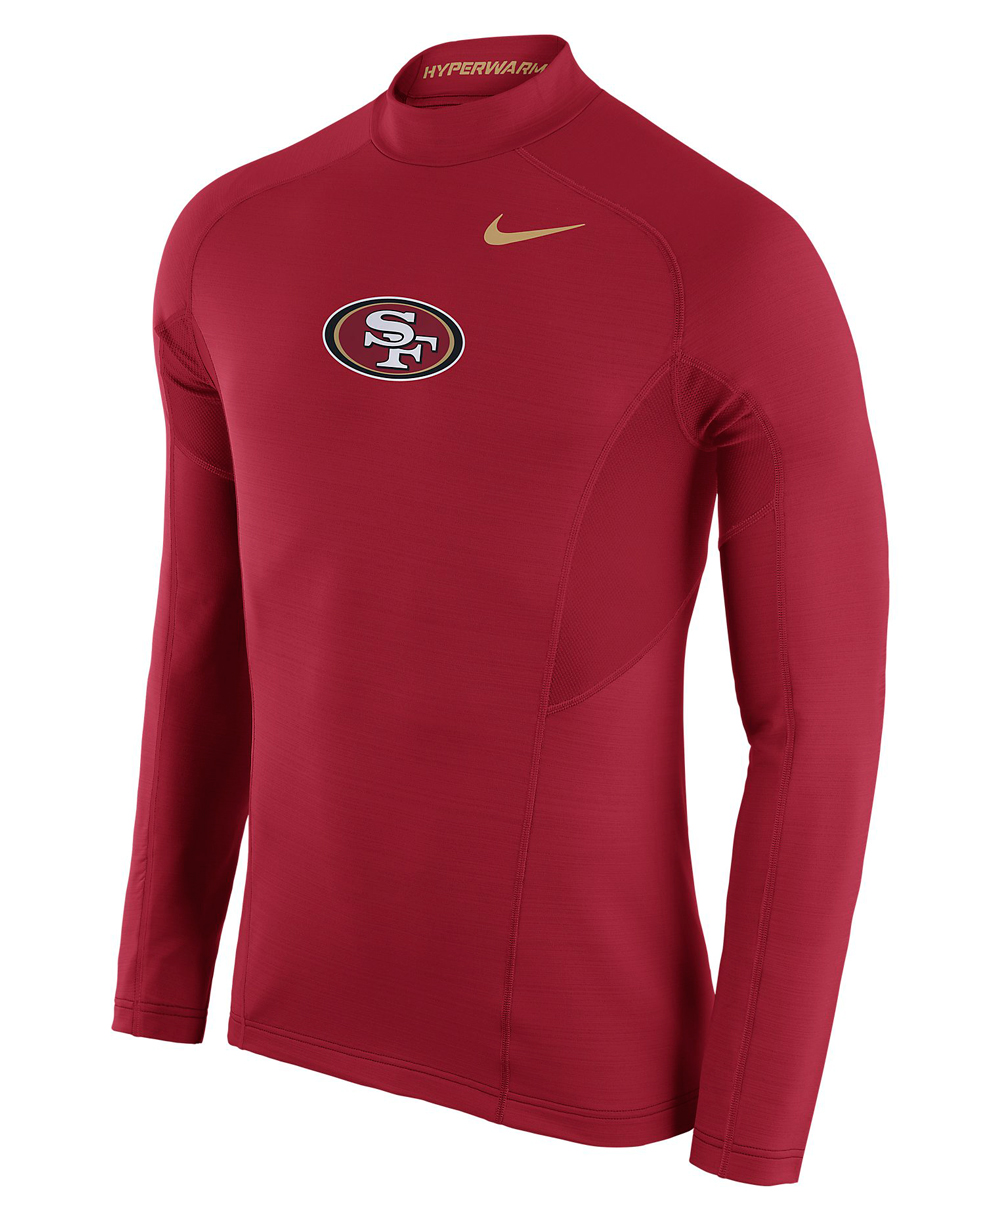 Nike Pro Hyperwarm Max Fitted Men's Long Sleeve Compression Shirt N...